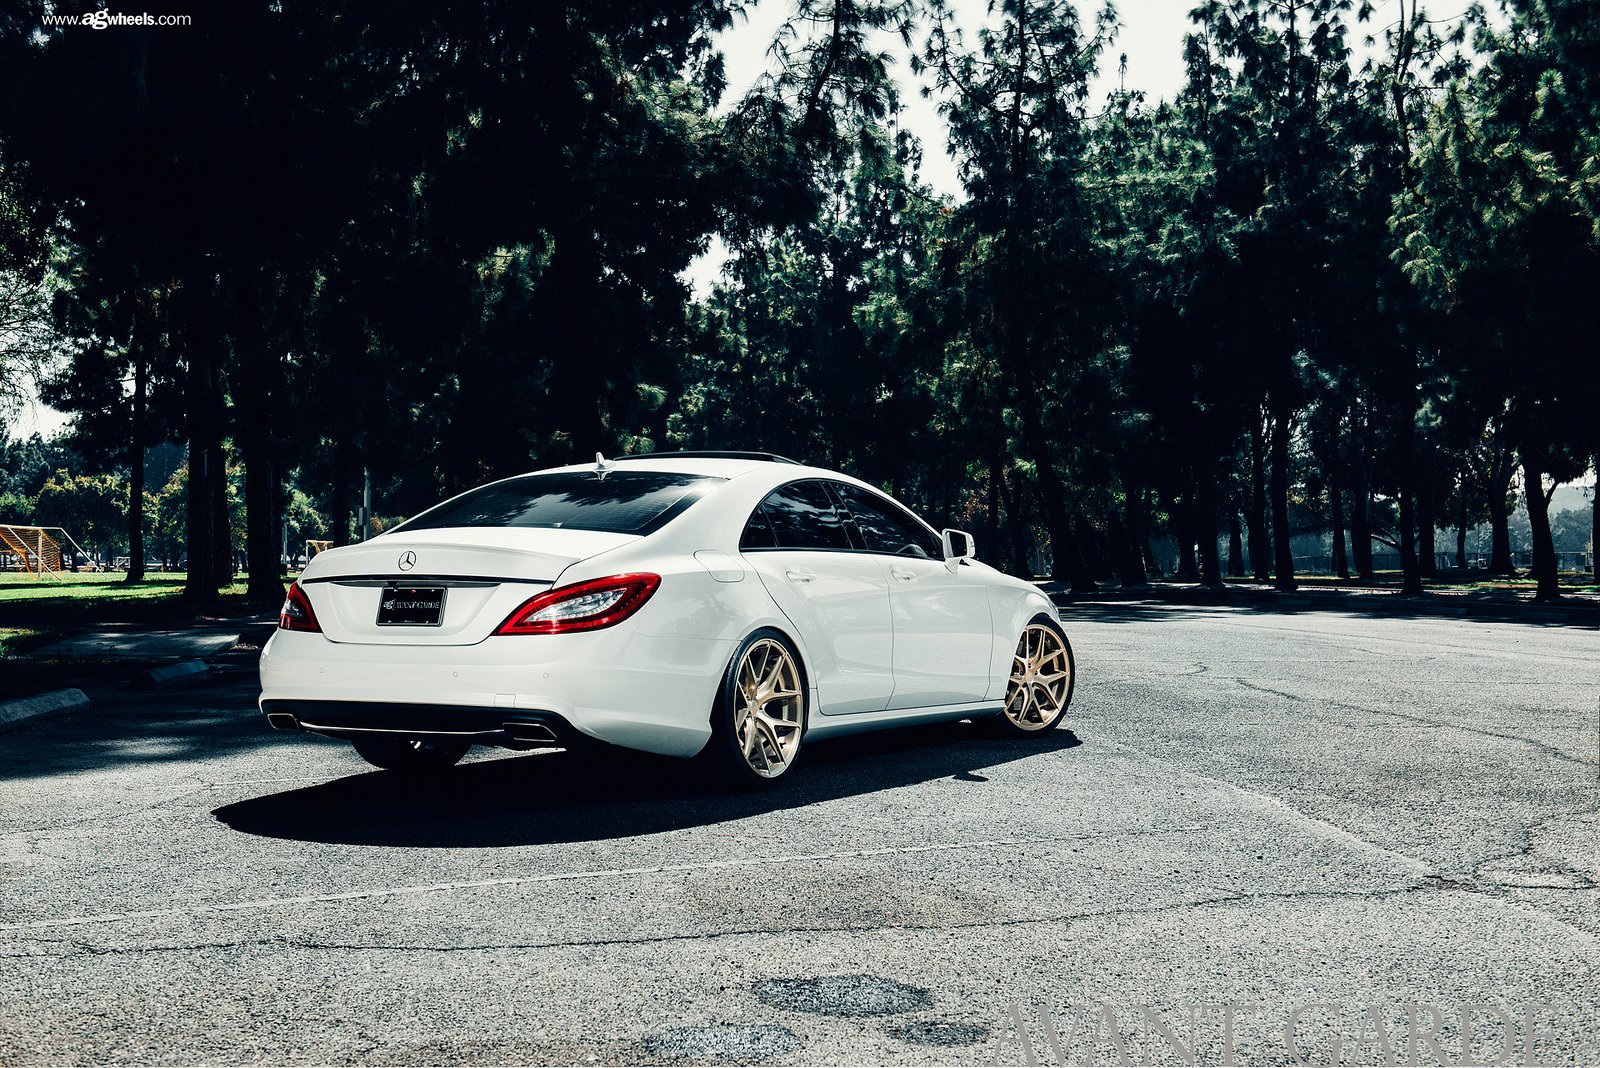 mercedes, Cls, Cars, White Wallpaper